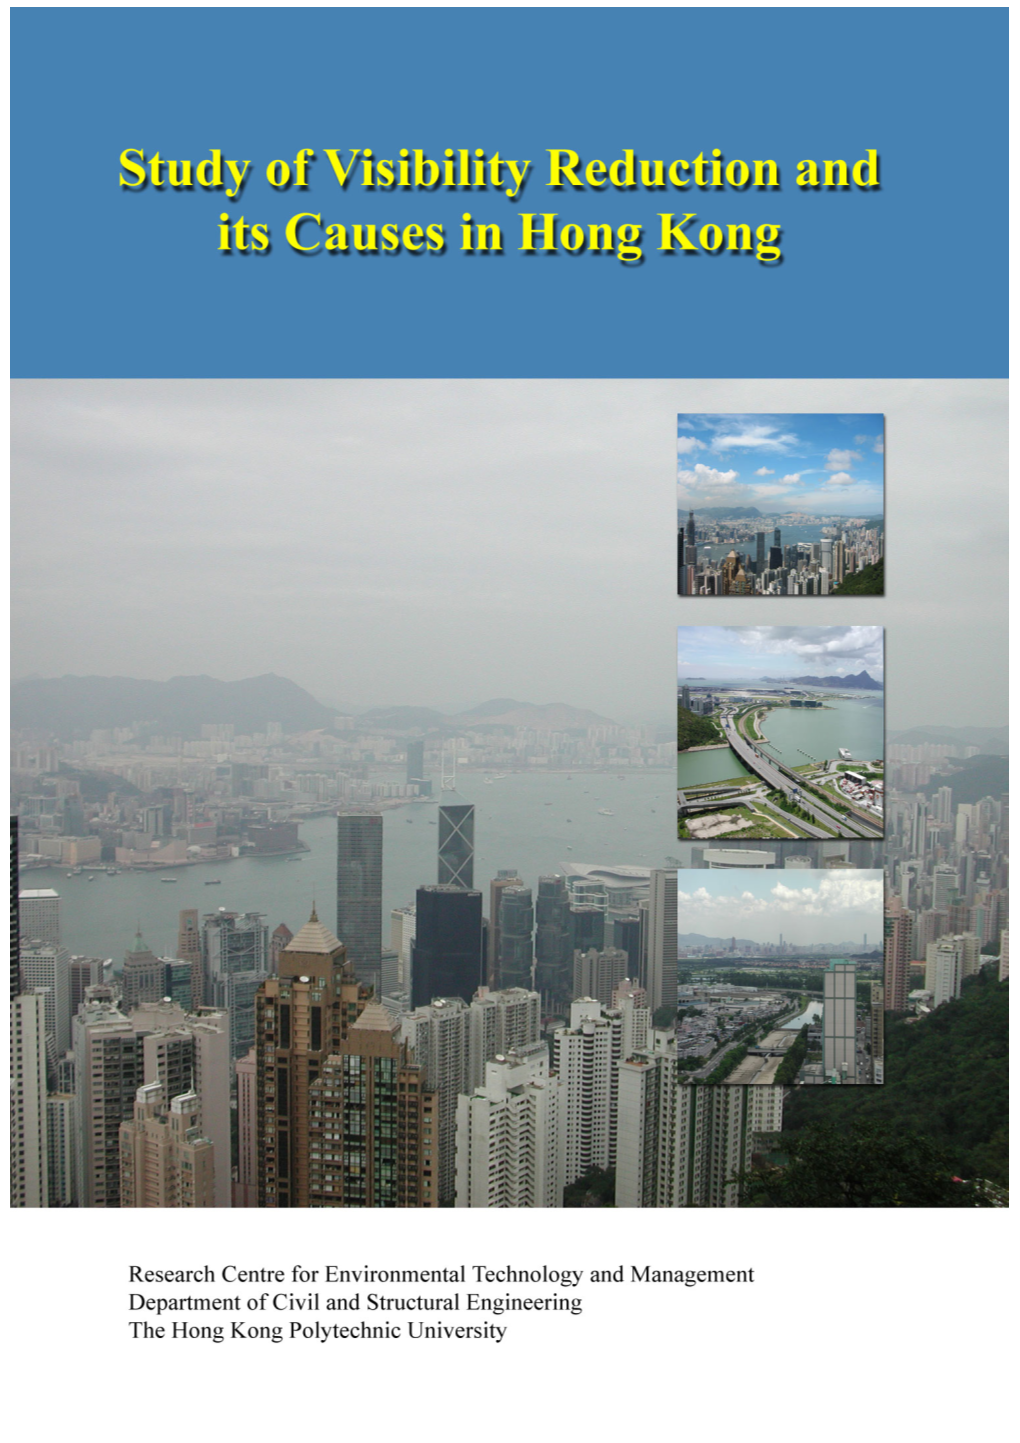 Study of Visibility Reduction and Its Causes in Hong Kong, 2003